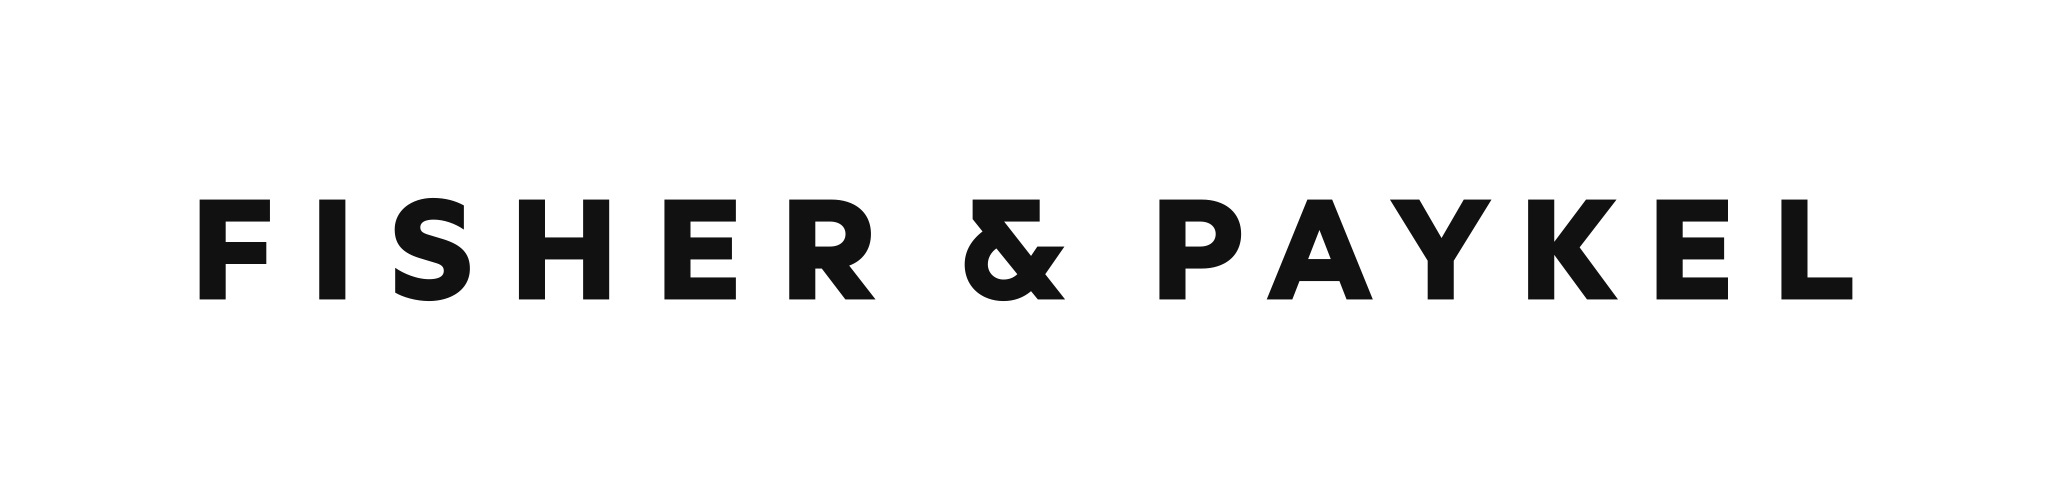 Fisher and Paykel Appliances Inc.